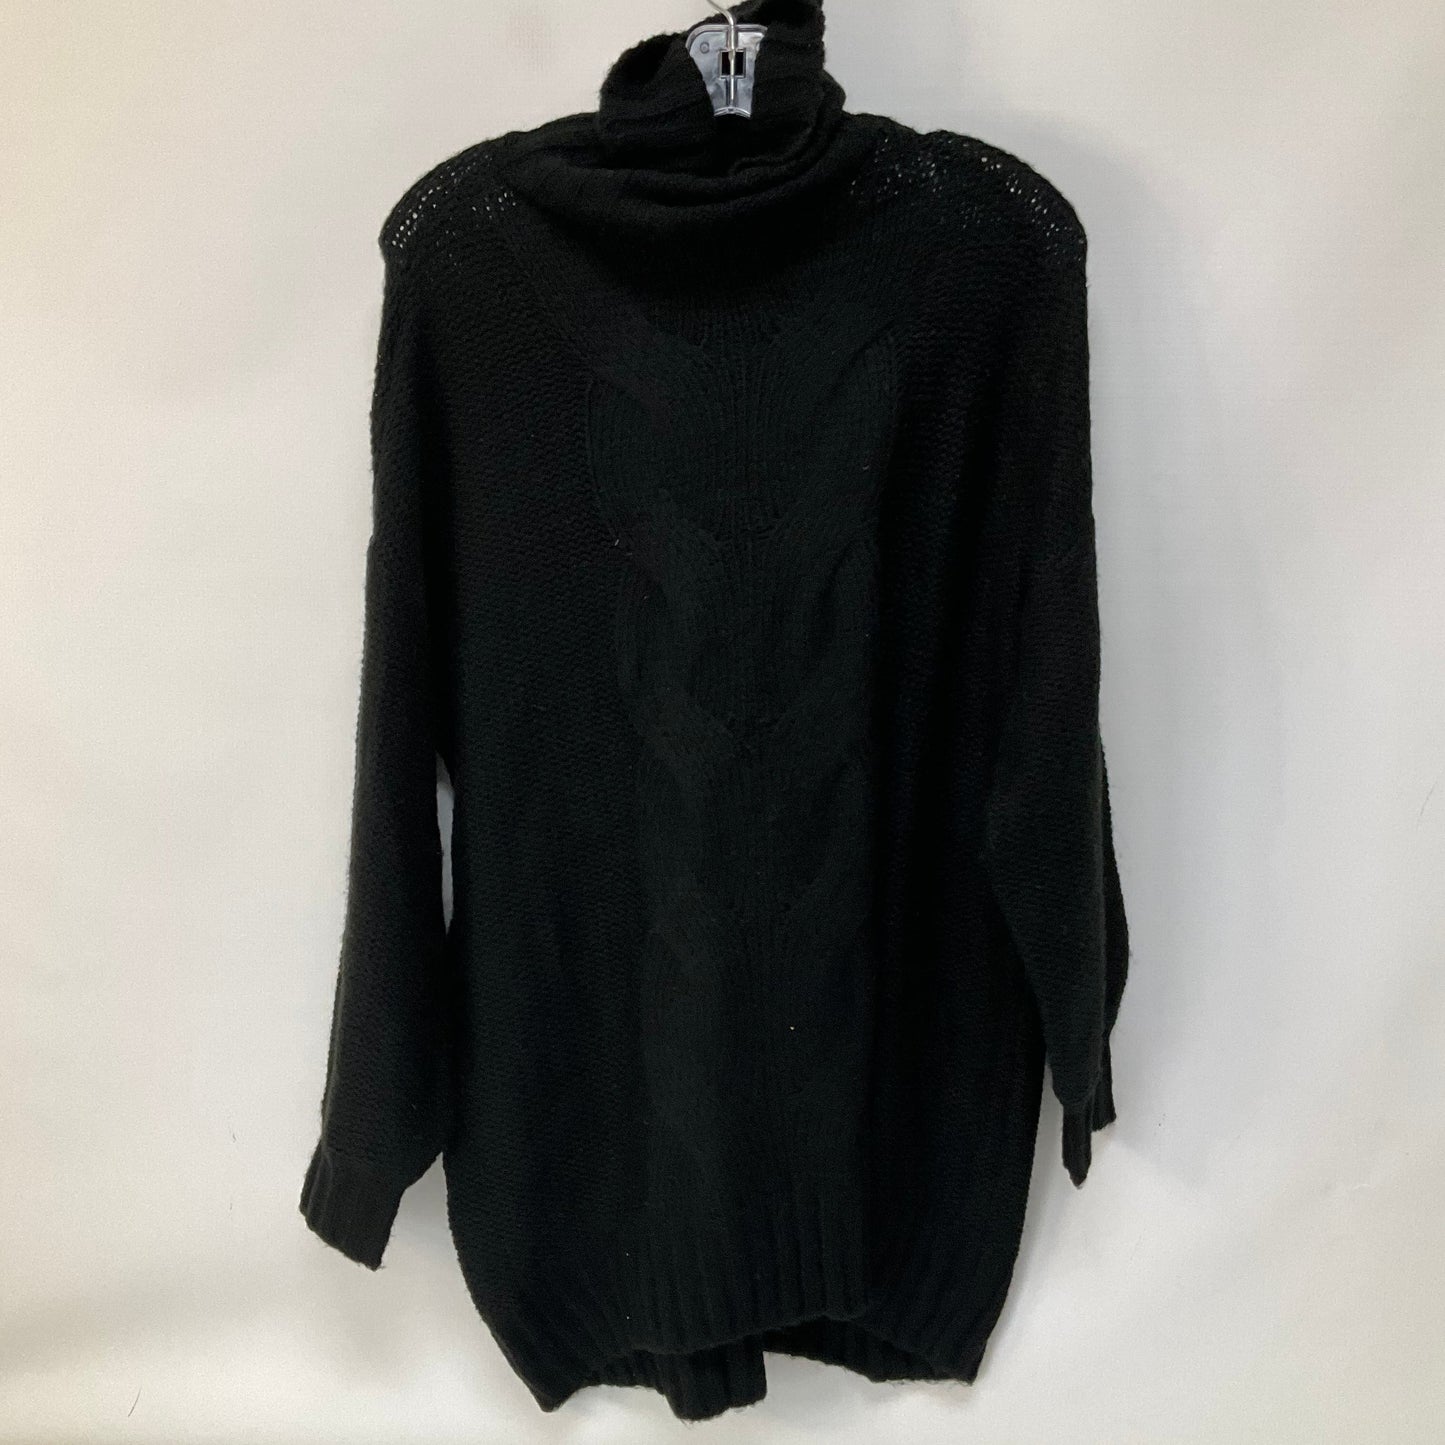 Black Sweater Aerie, Size S